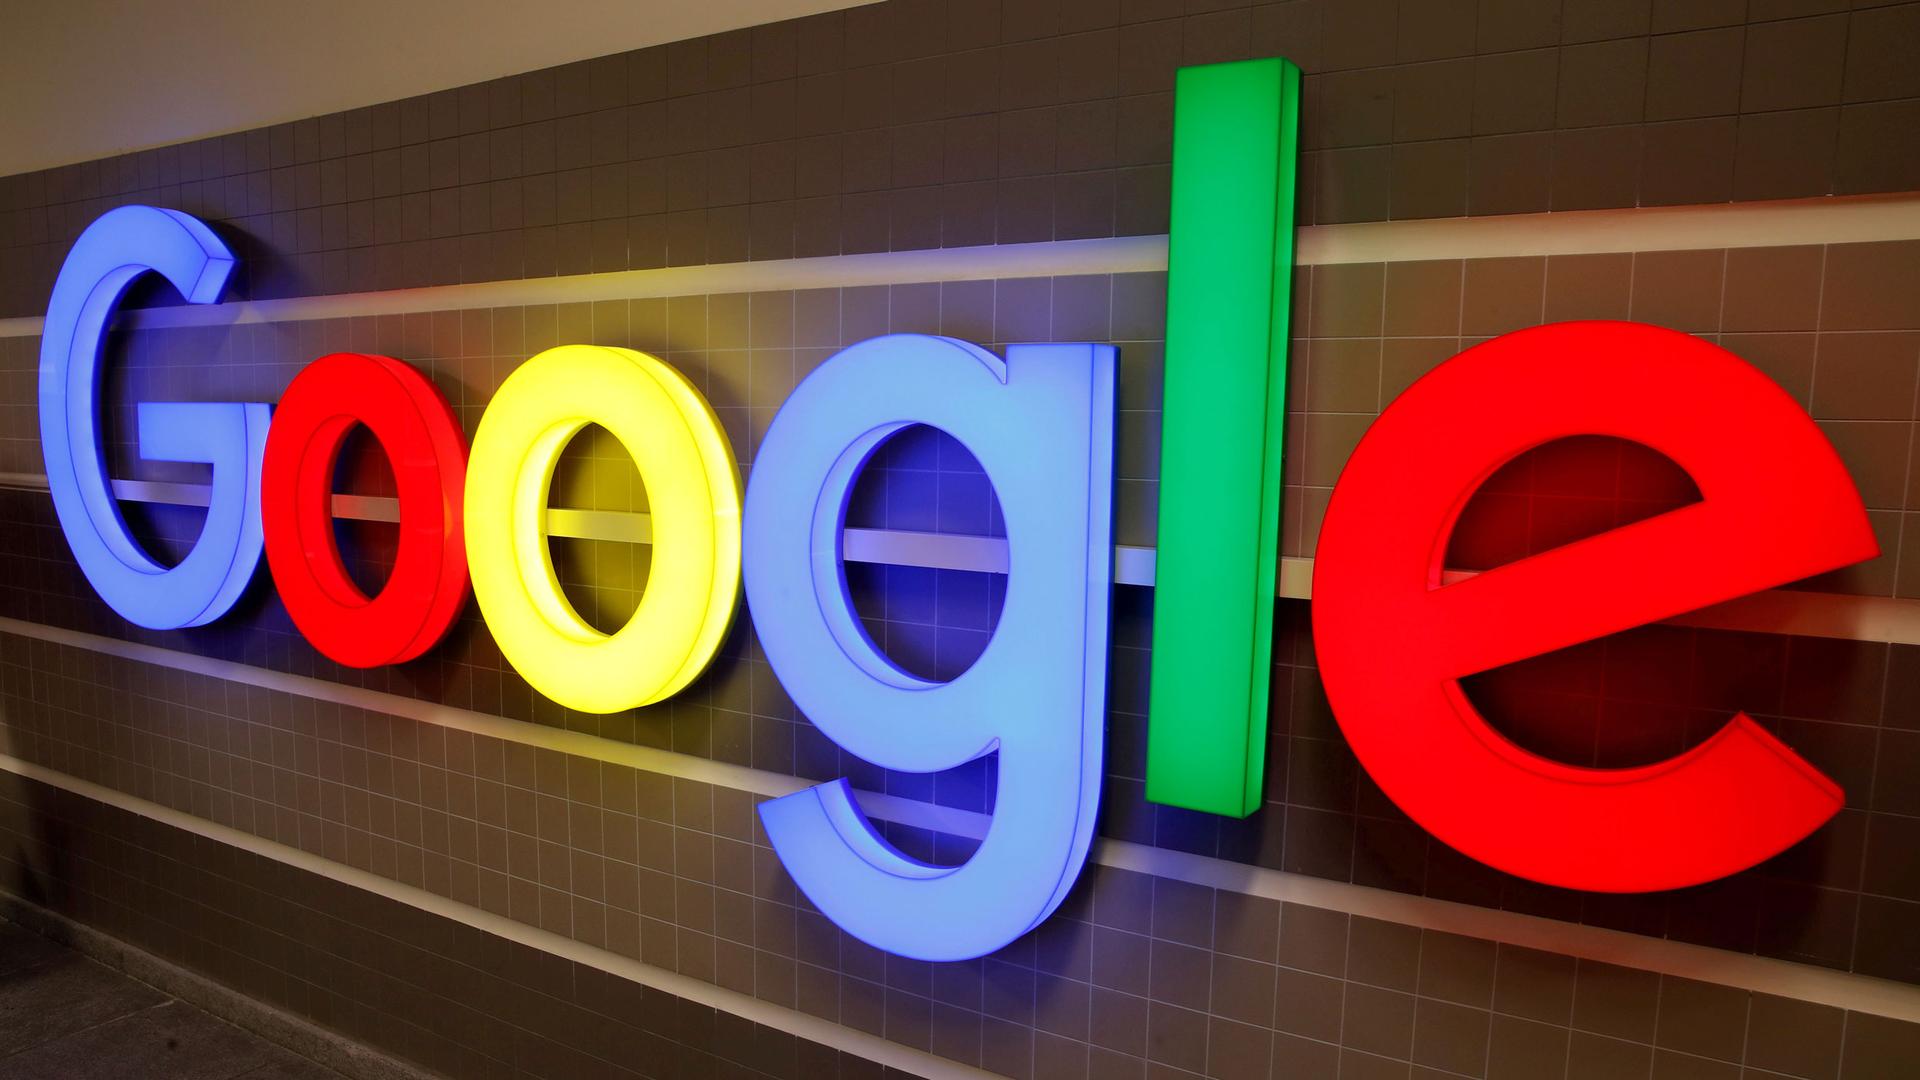 With letters that take up the entire frame of the photo, an illuminated Google logo is shown against a tile backdrop.